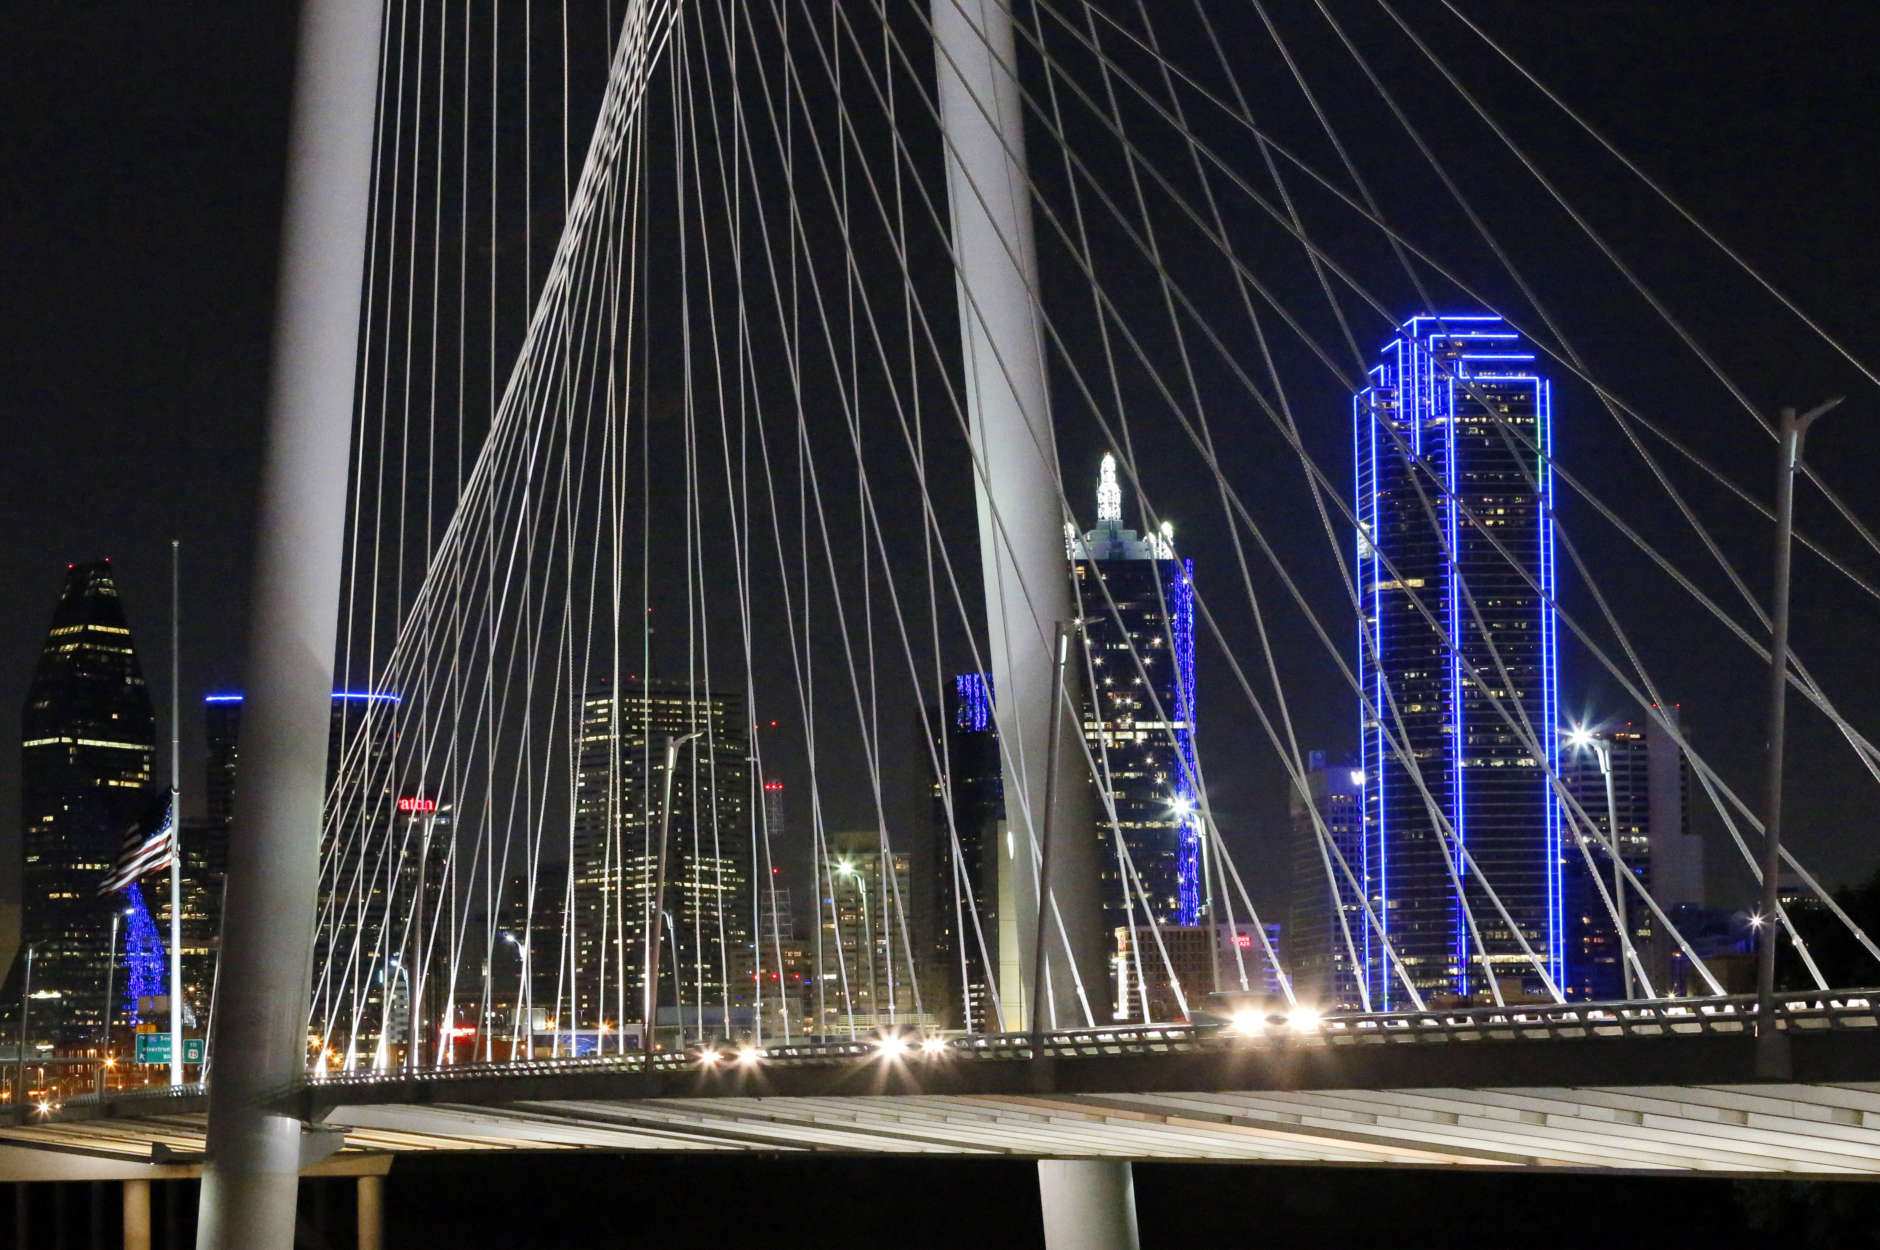 The Dallas city skyline is seen through the Margaret Hunt Hill Bridge, Saturday, July 9, 2016, in Dallas. Many of the cities buildings and structures are highlighted in blue as a tribute to the several police officers that were killed and others injured in a attack Thursday night by gunman Micah Johnson. (AP Photo/Tony Gutierrez)